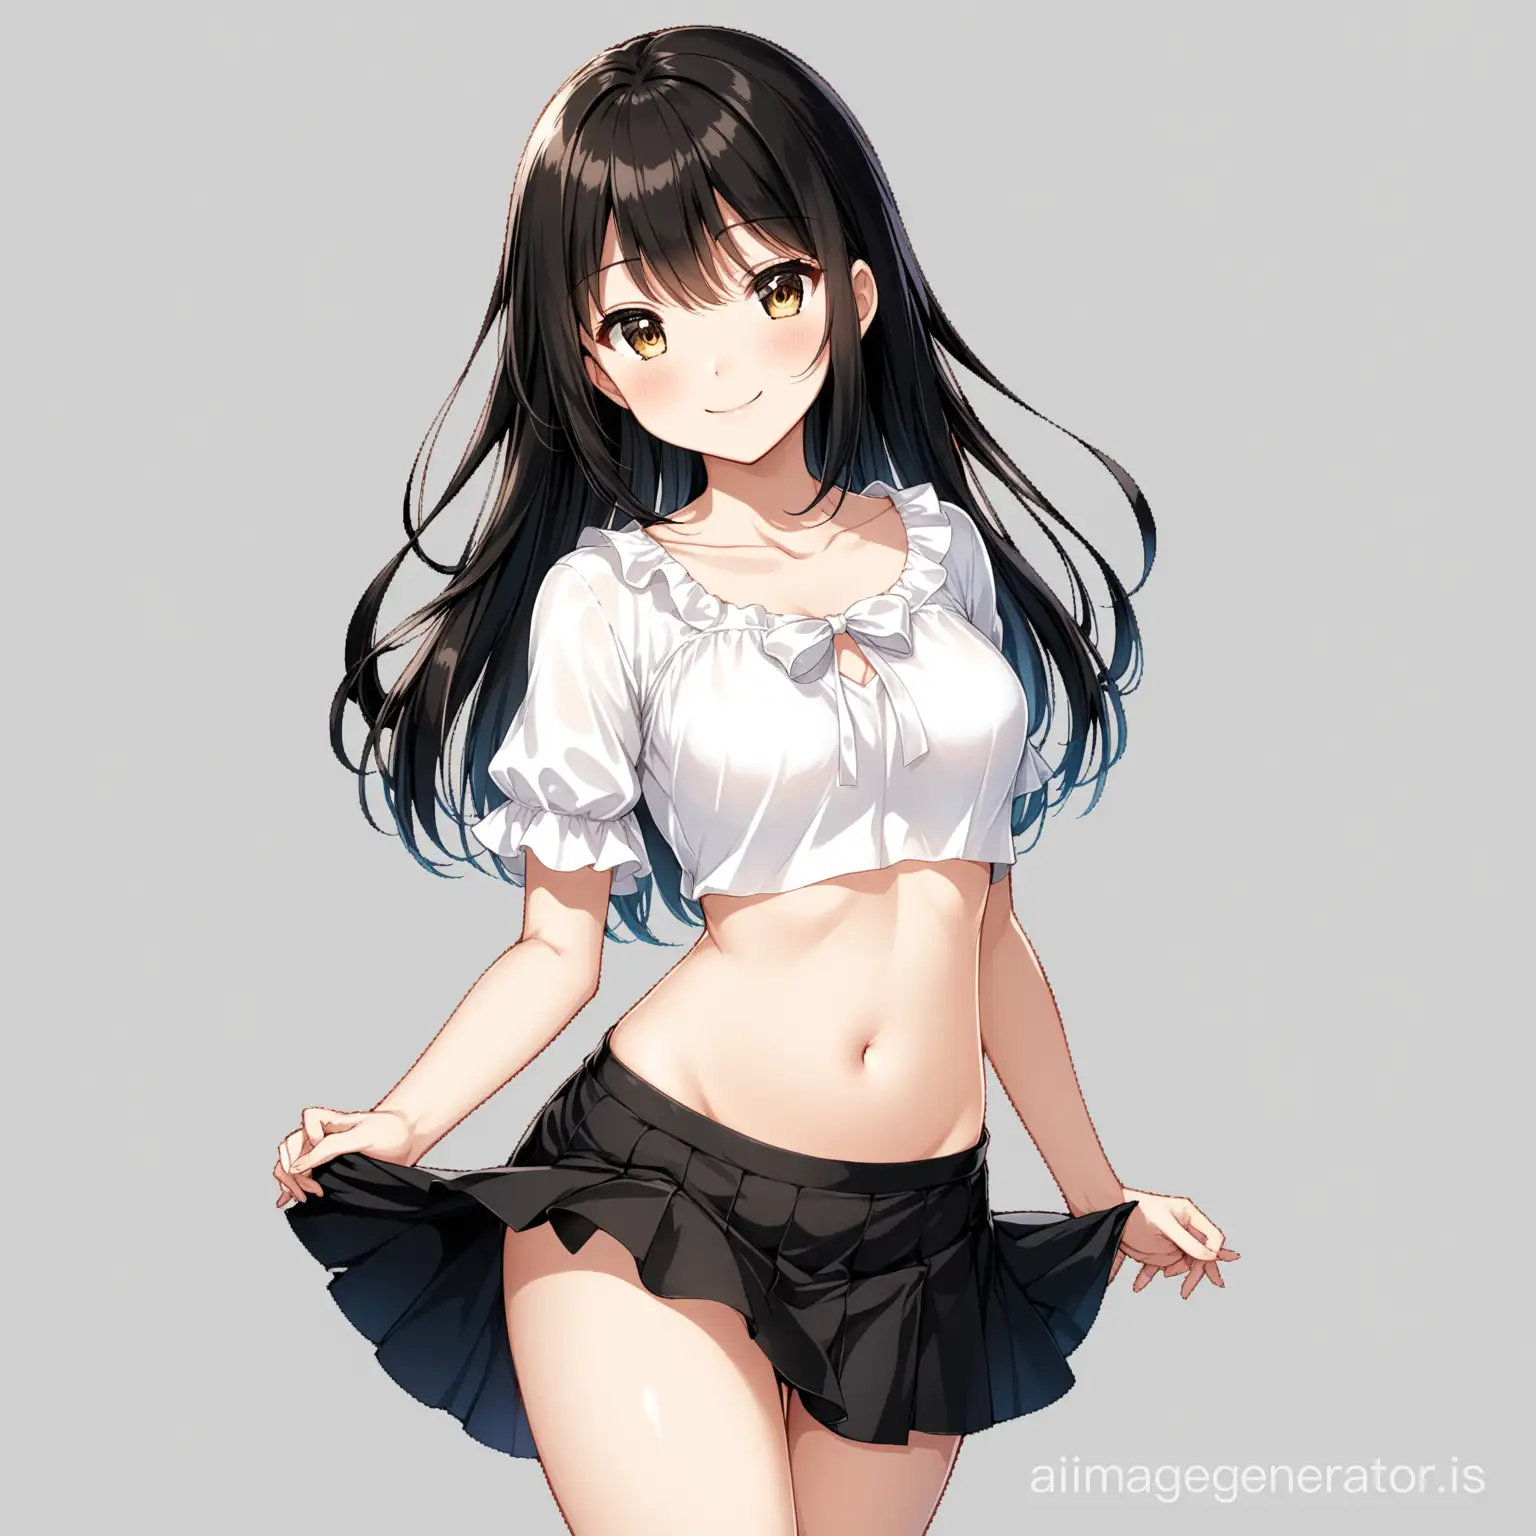 Smiling-Anime-Girl-with-Black-Skirt-and-White-BlouseTop